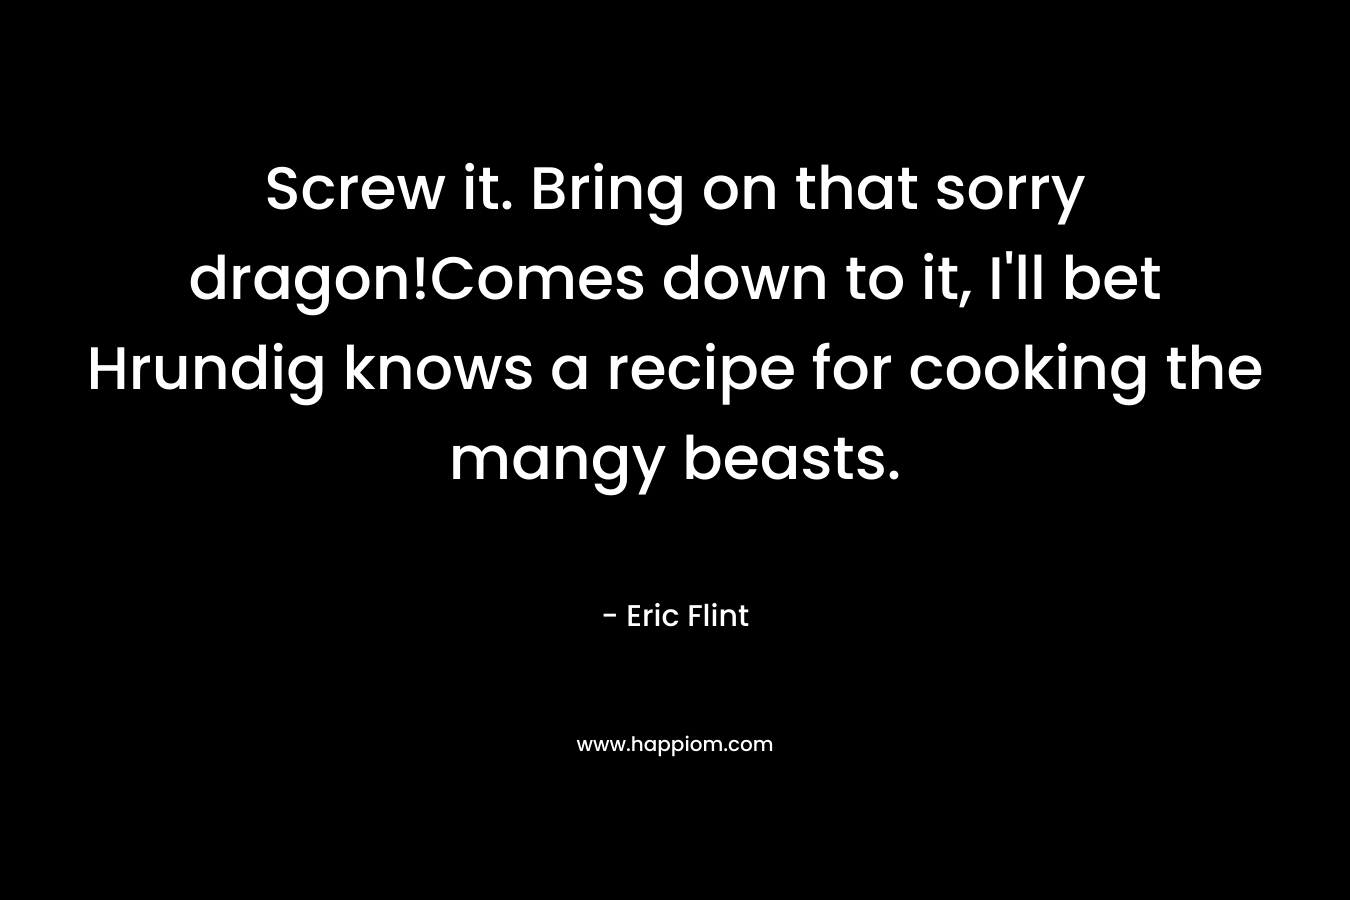 Screw it. Bring on that sorry dragon!Comes down to it, I'll bet Hrundig knows a recipe for cooking the mangy beasts.